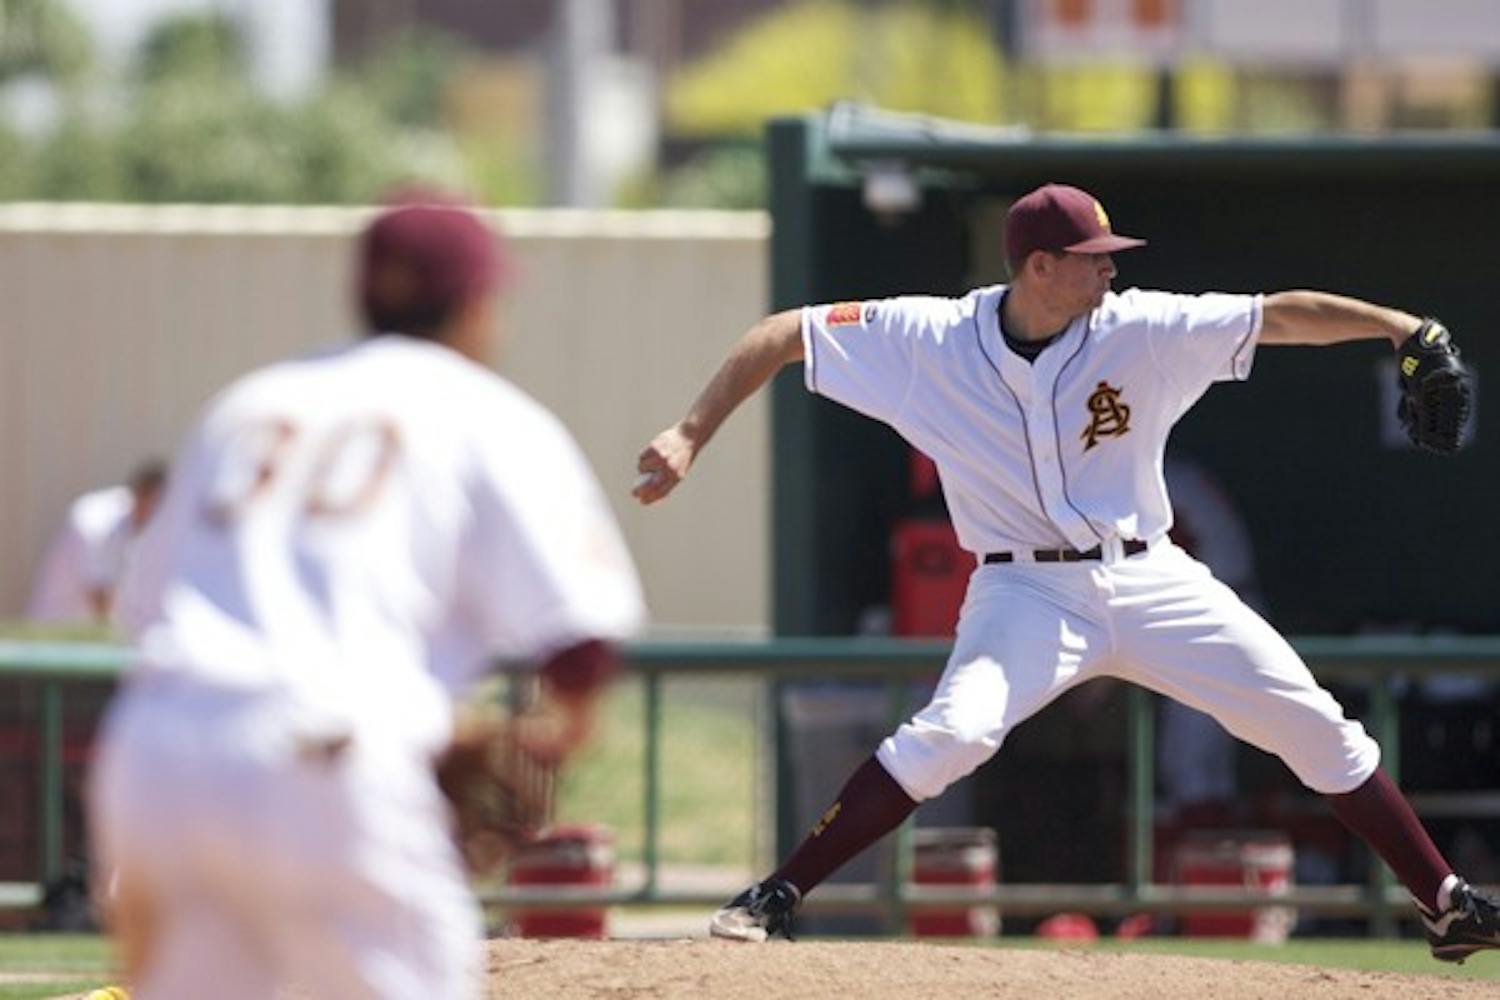 Back in stride: ASU sophomore Jake Barrett pitches as junior infielder Riccio Torrez looks on during the Sun Devils’ 10-4 win over Washington State on Sunday. Barrett picked up the win as ASU completed the sweep over the Cougars. (Photo by Scott Stuk)